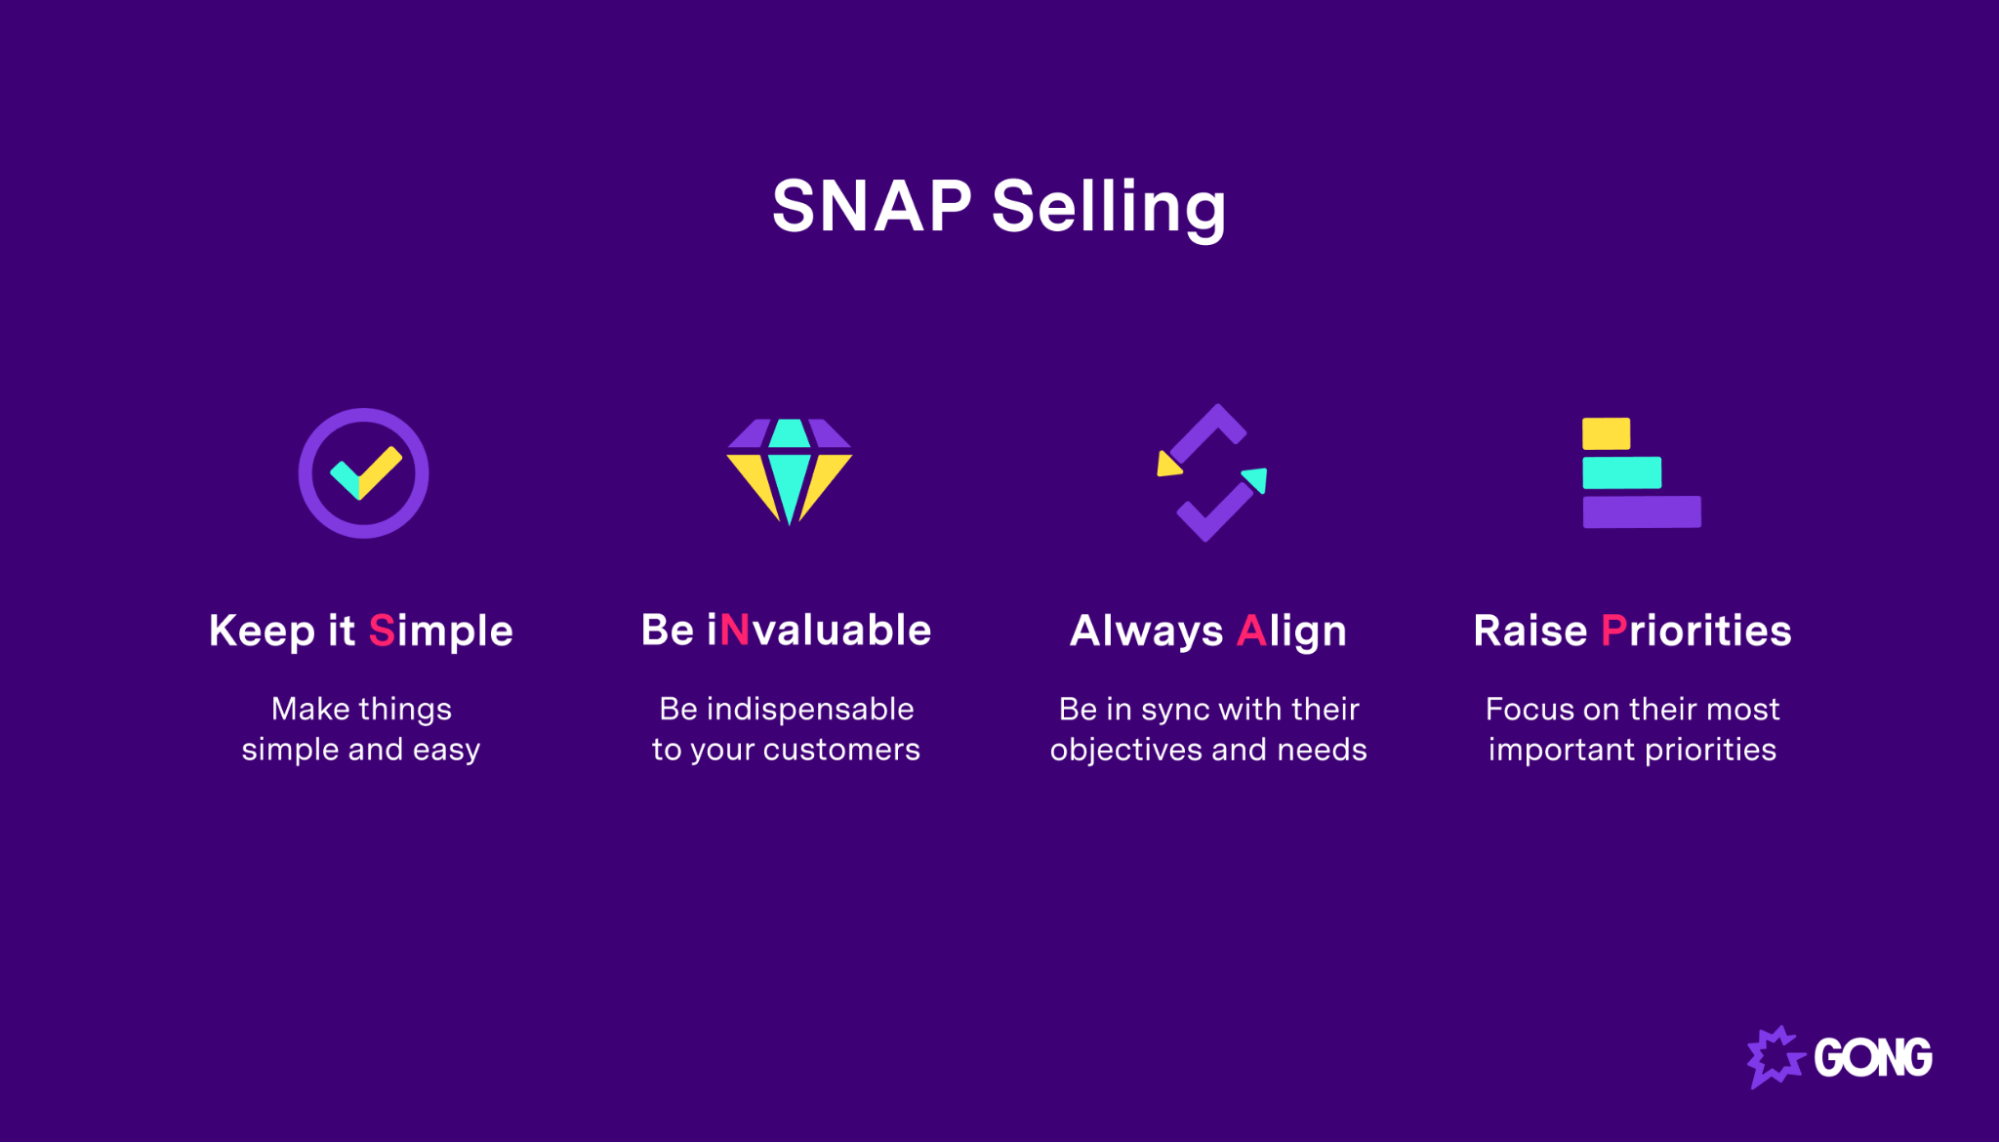 SNAP Selling methodology overview